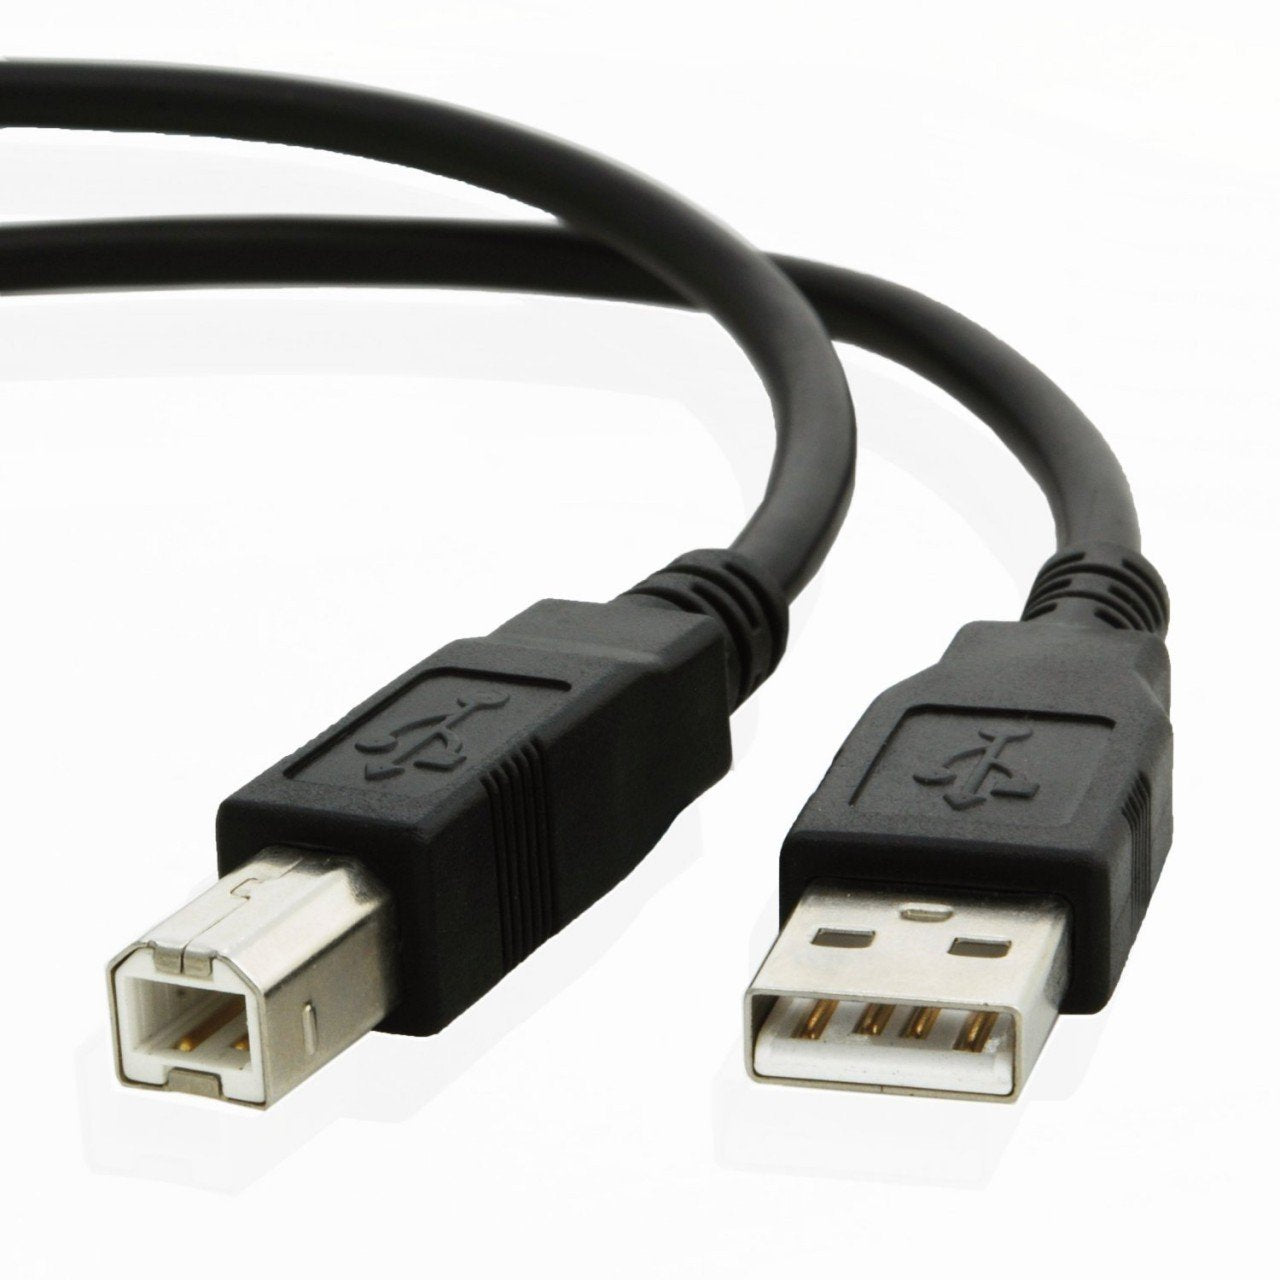 USB cable for Canon PIXMA TS3150